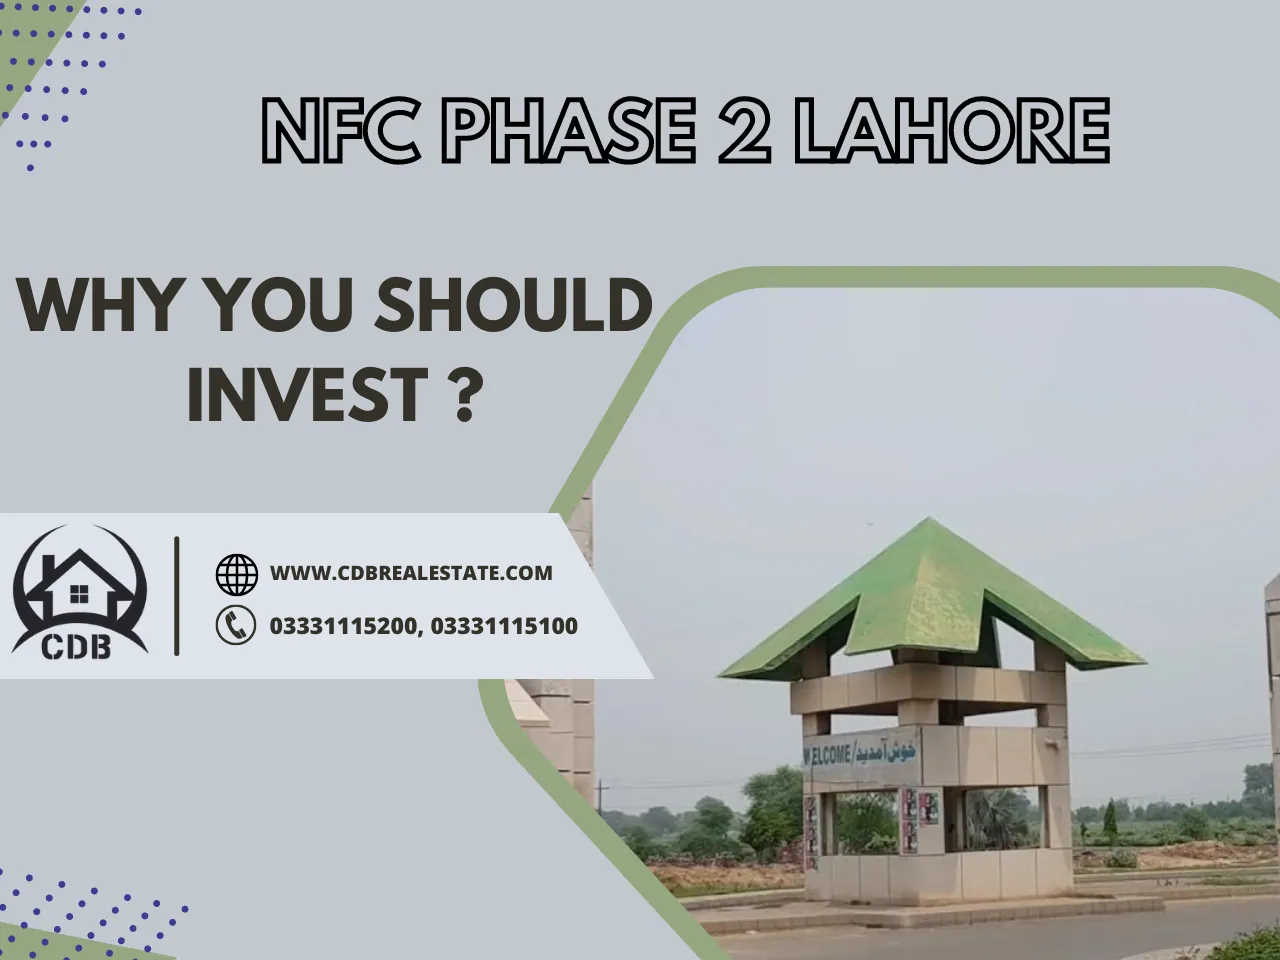 why you should invest in nfc phase 2 lahore